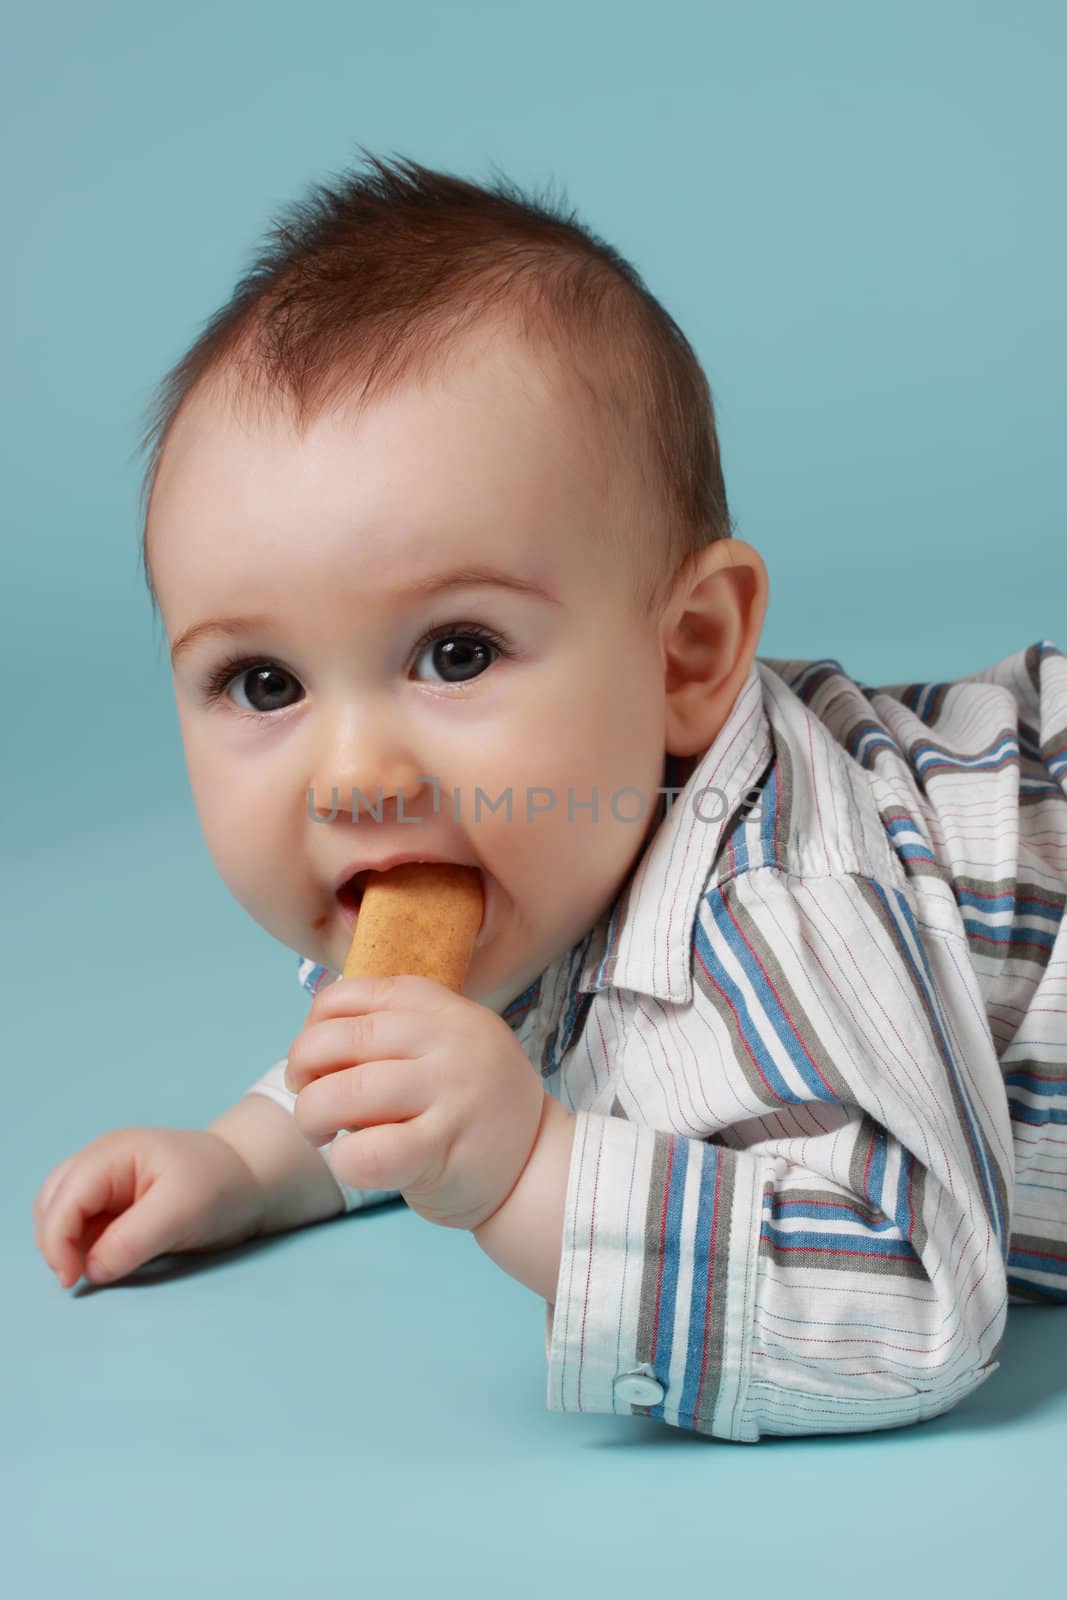 baby boy eating a cookie by lanalanglois